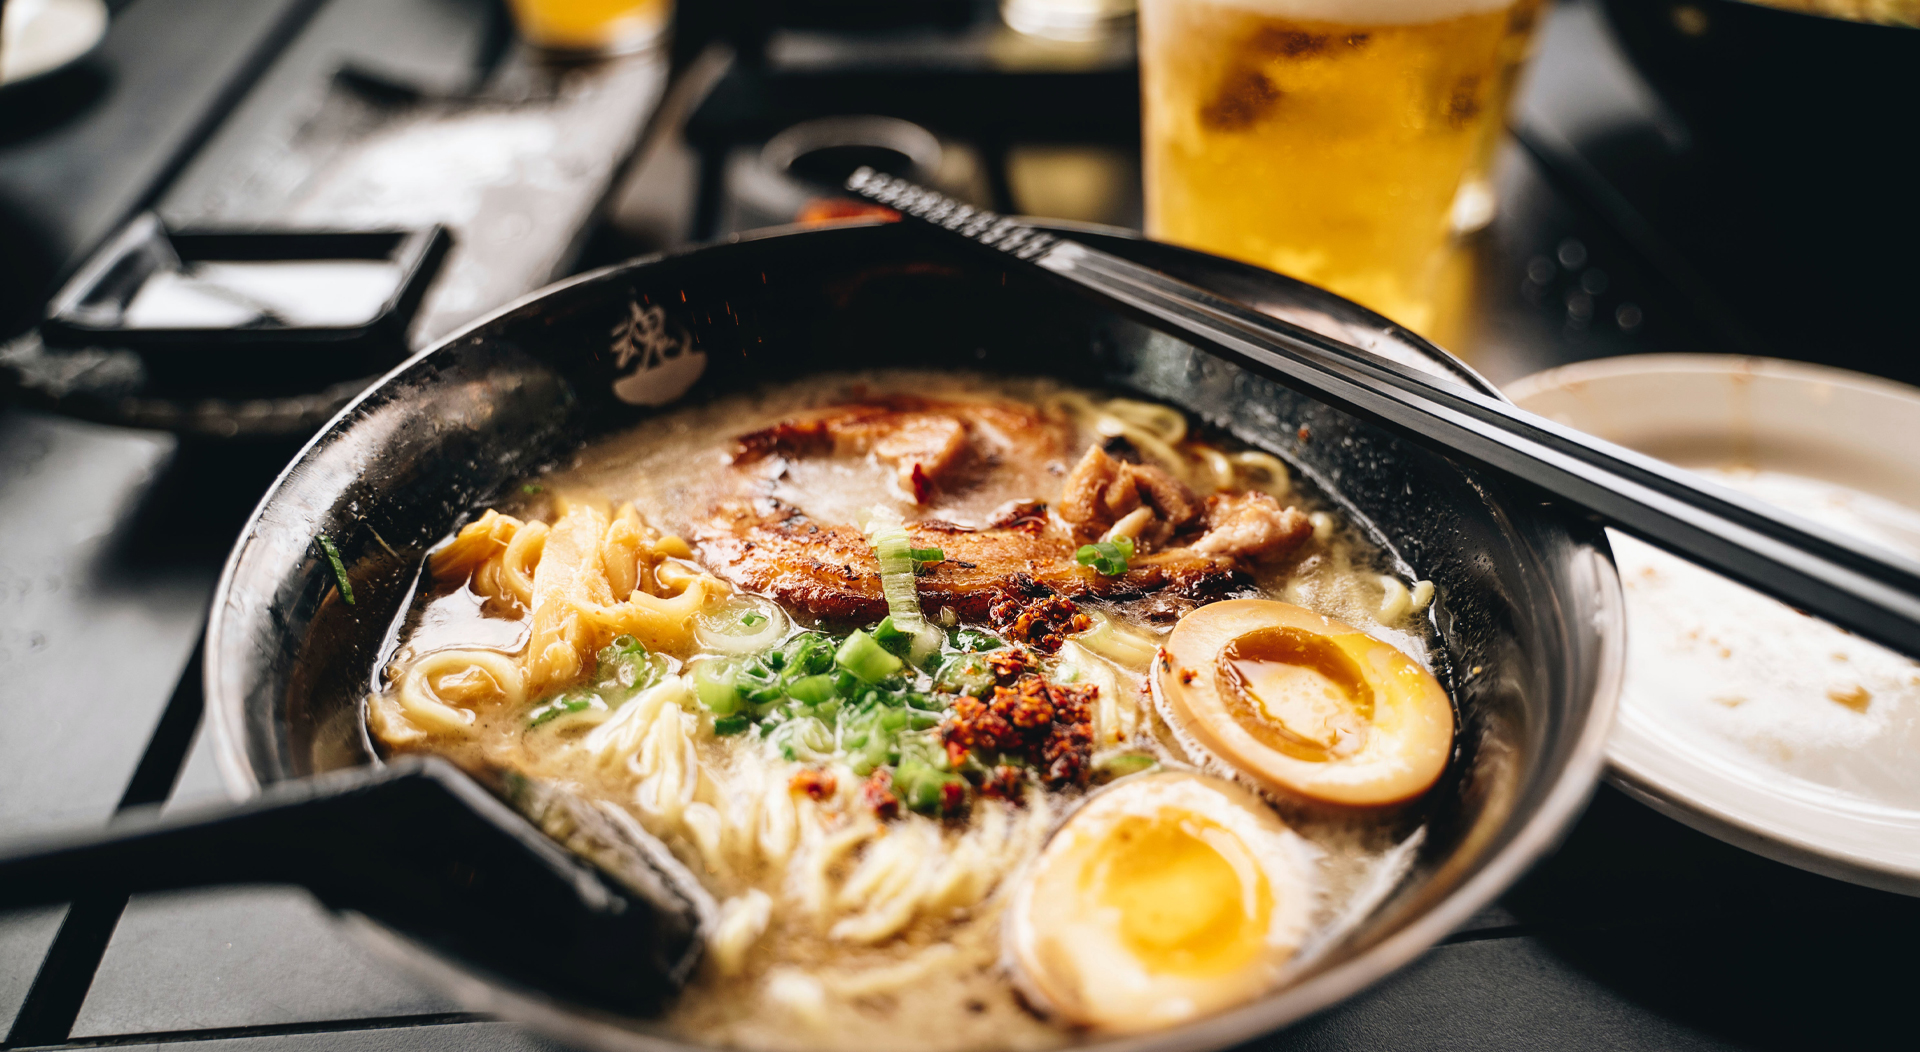 authentic Japanese ramen served at a food truck